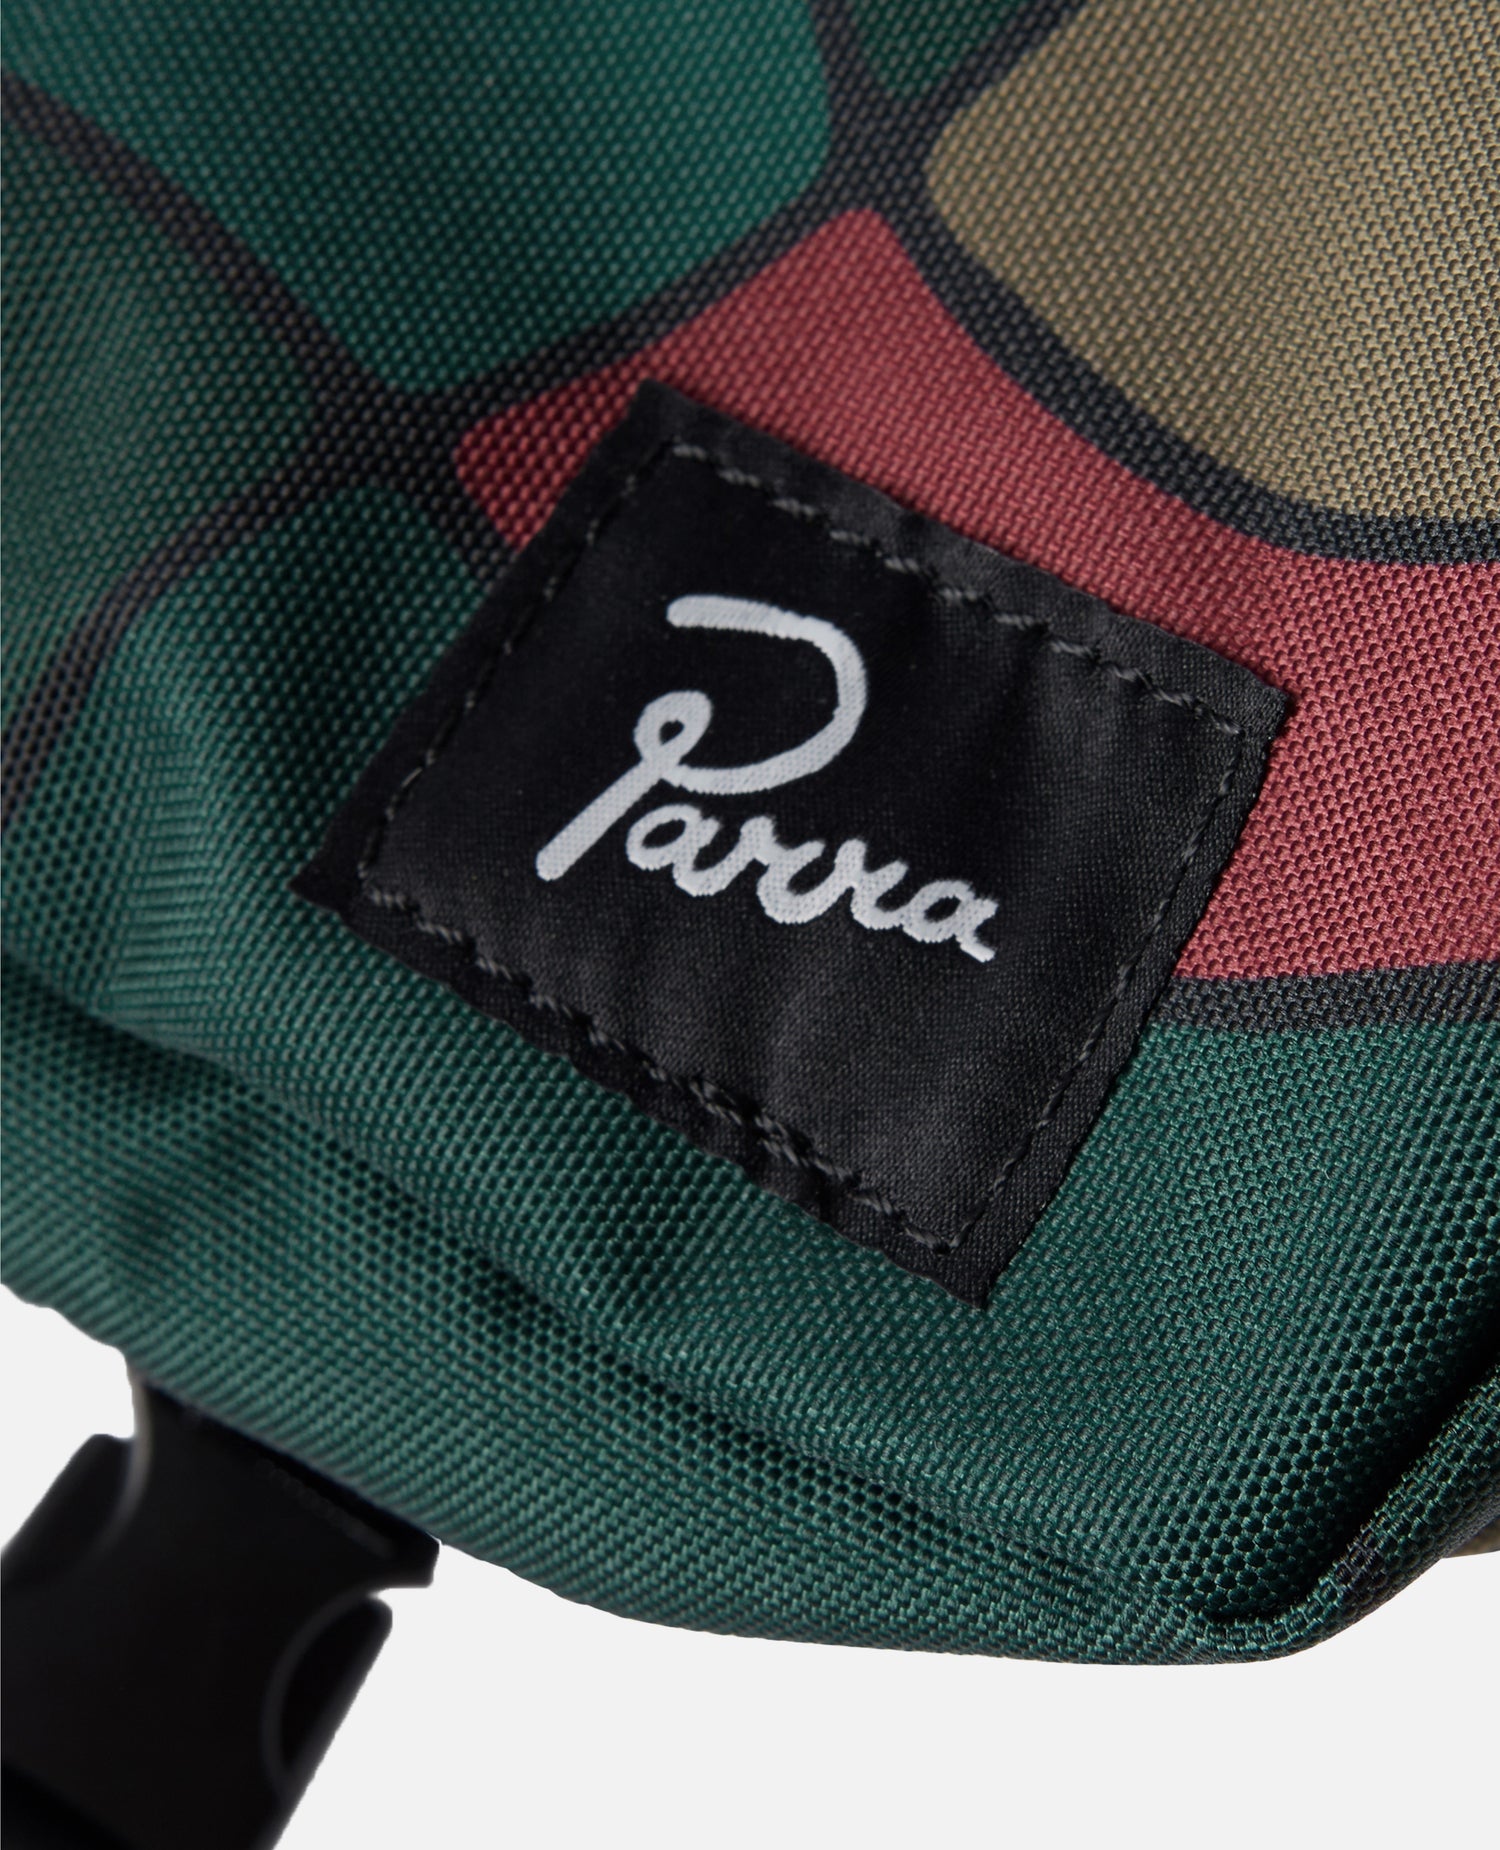 byParra Trees In Wind Toiletry Bag (Camo Green)